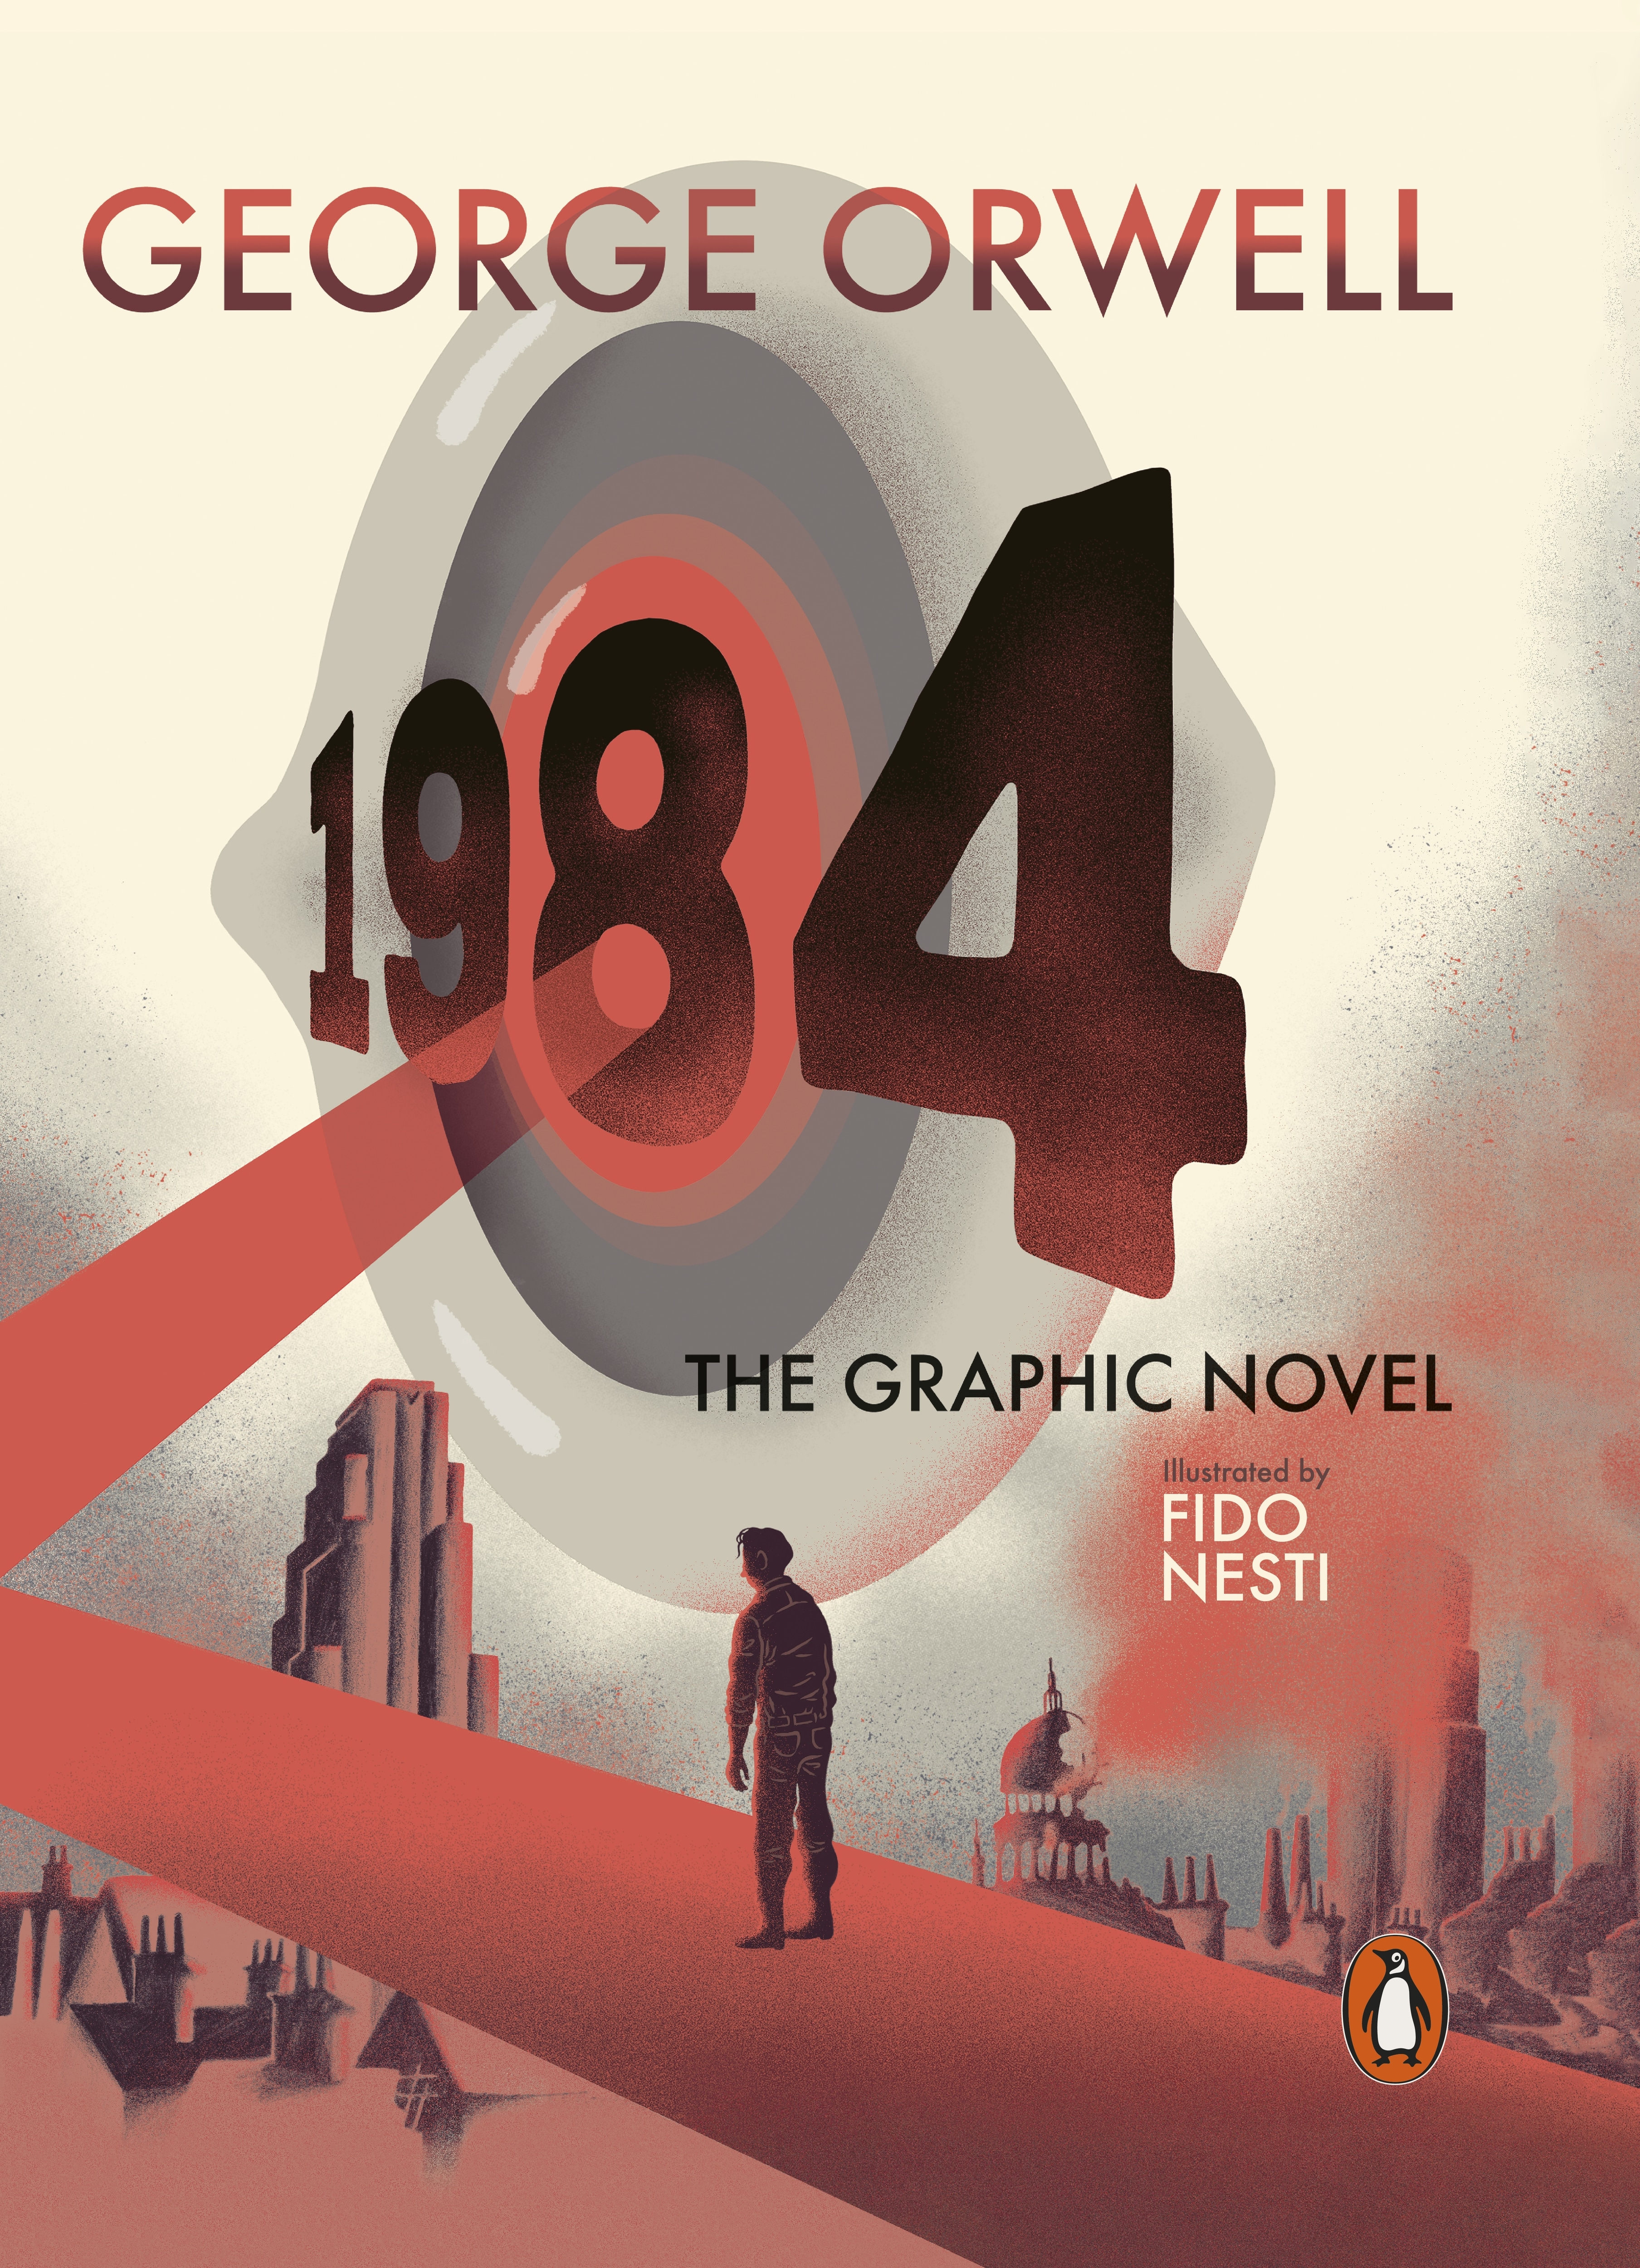 Book “Nineteen Eighty-Four” by George Orwell — April 1, 2021